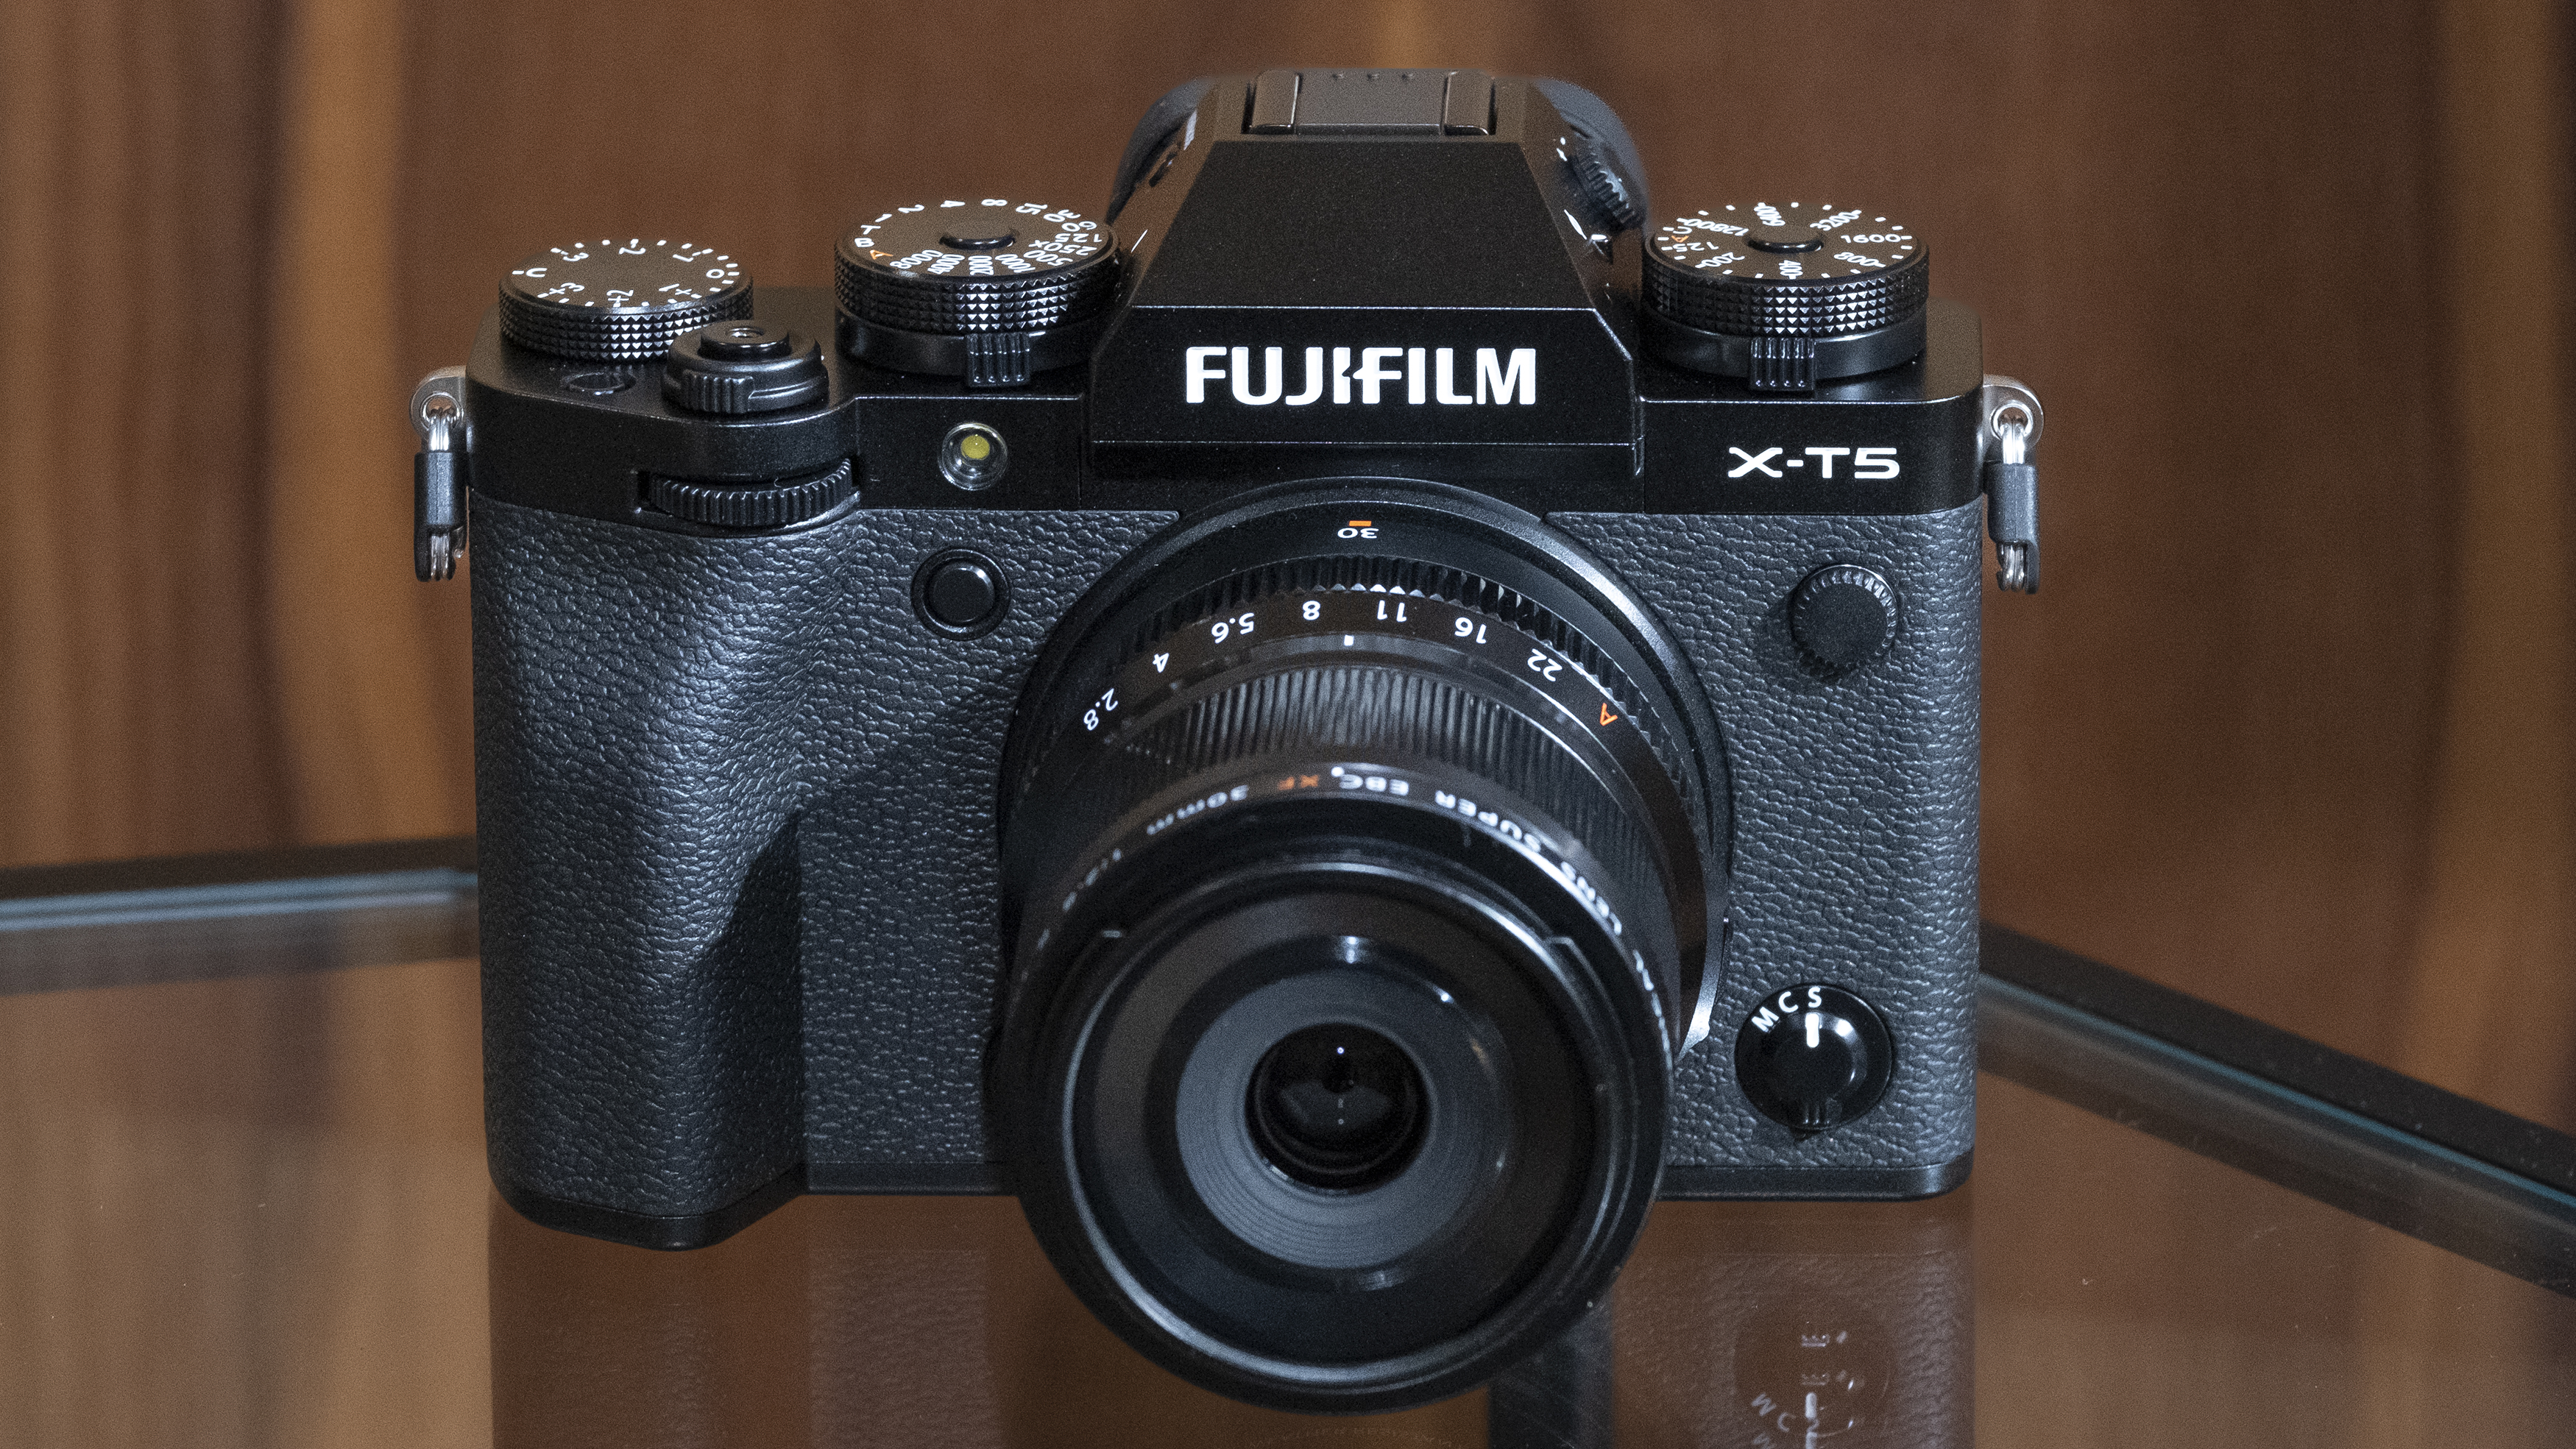 The Fujifilm X-T5 camera sitting on a table